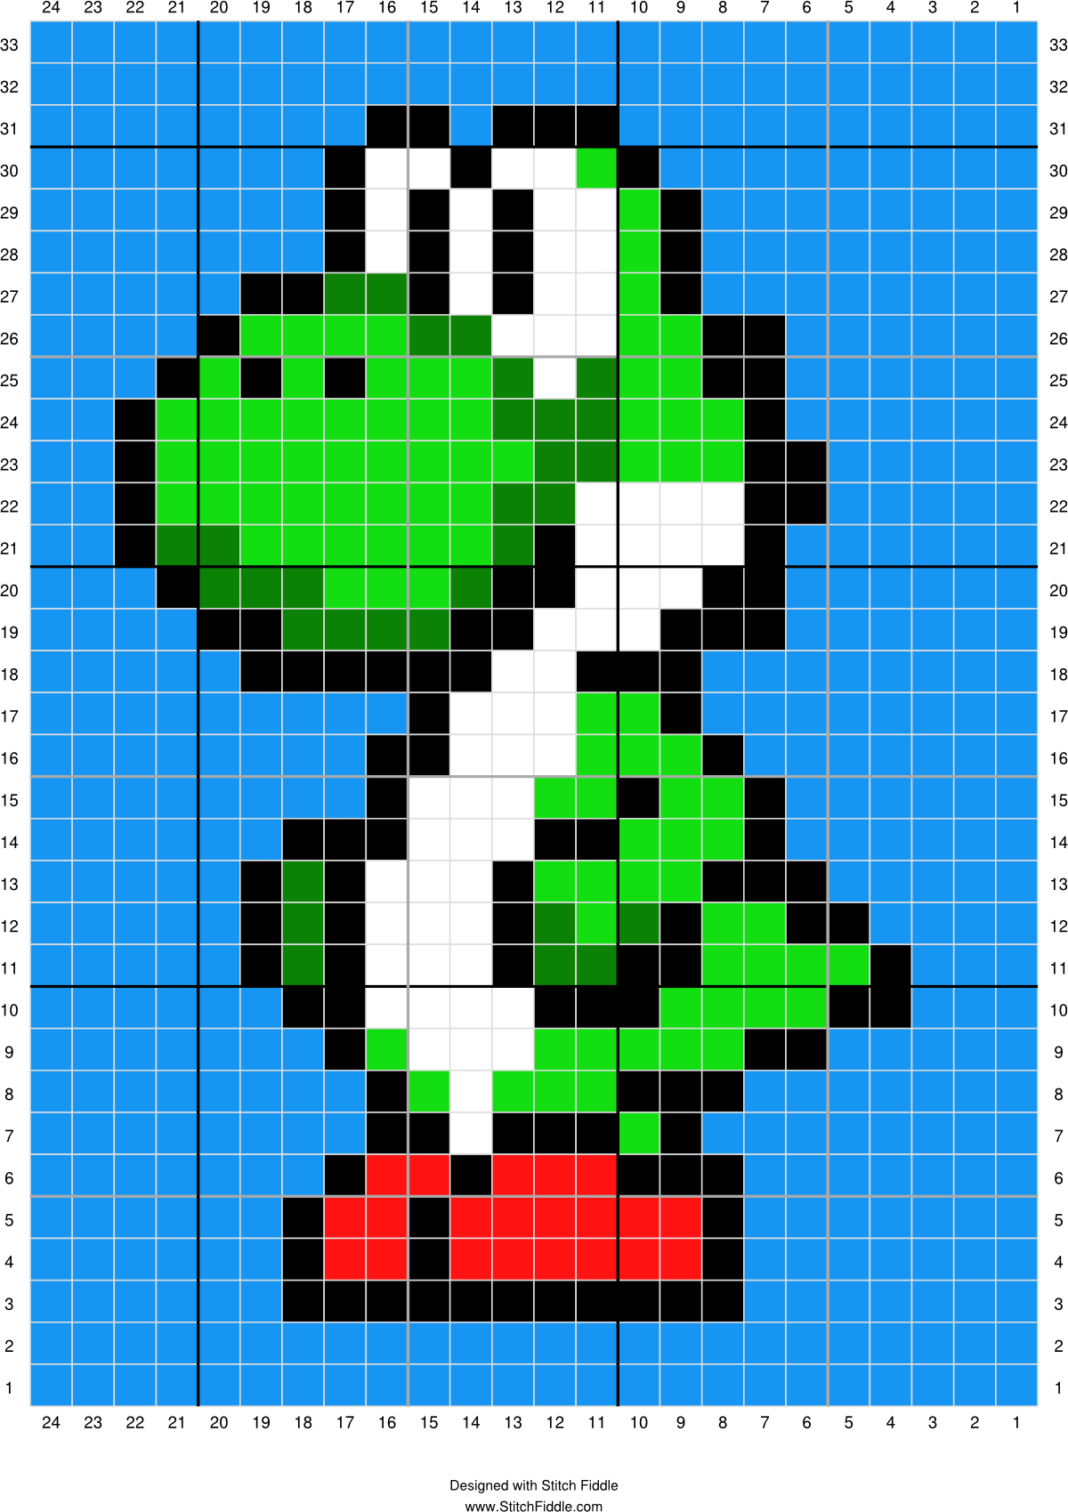 yoshi pixel art - Stitch Fiddle - InfographicNow.com | Your Number One ...